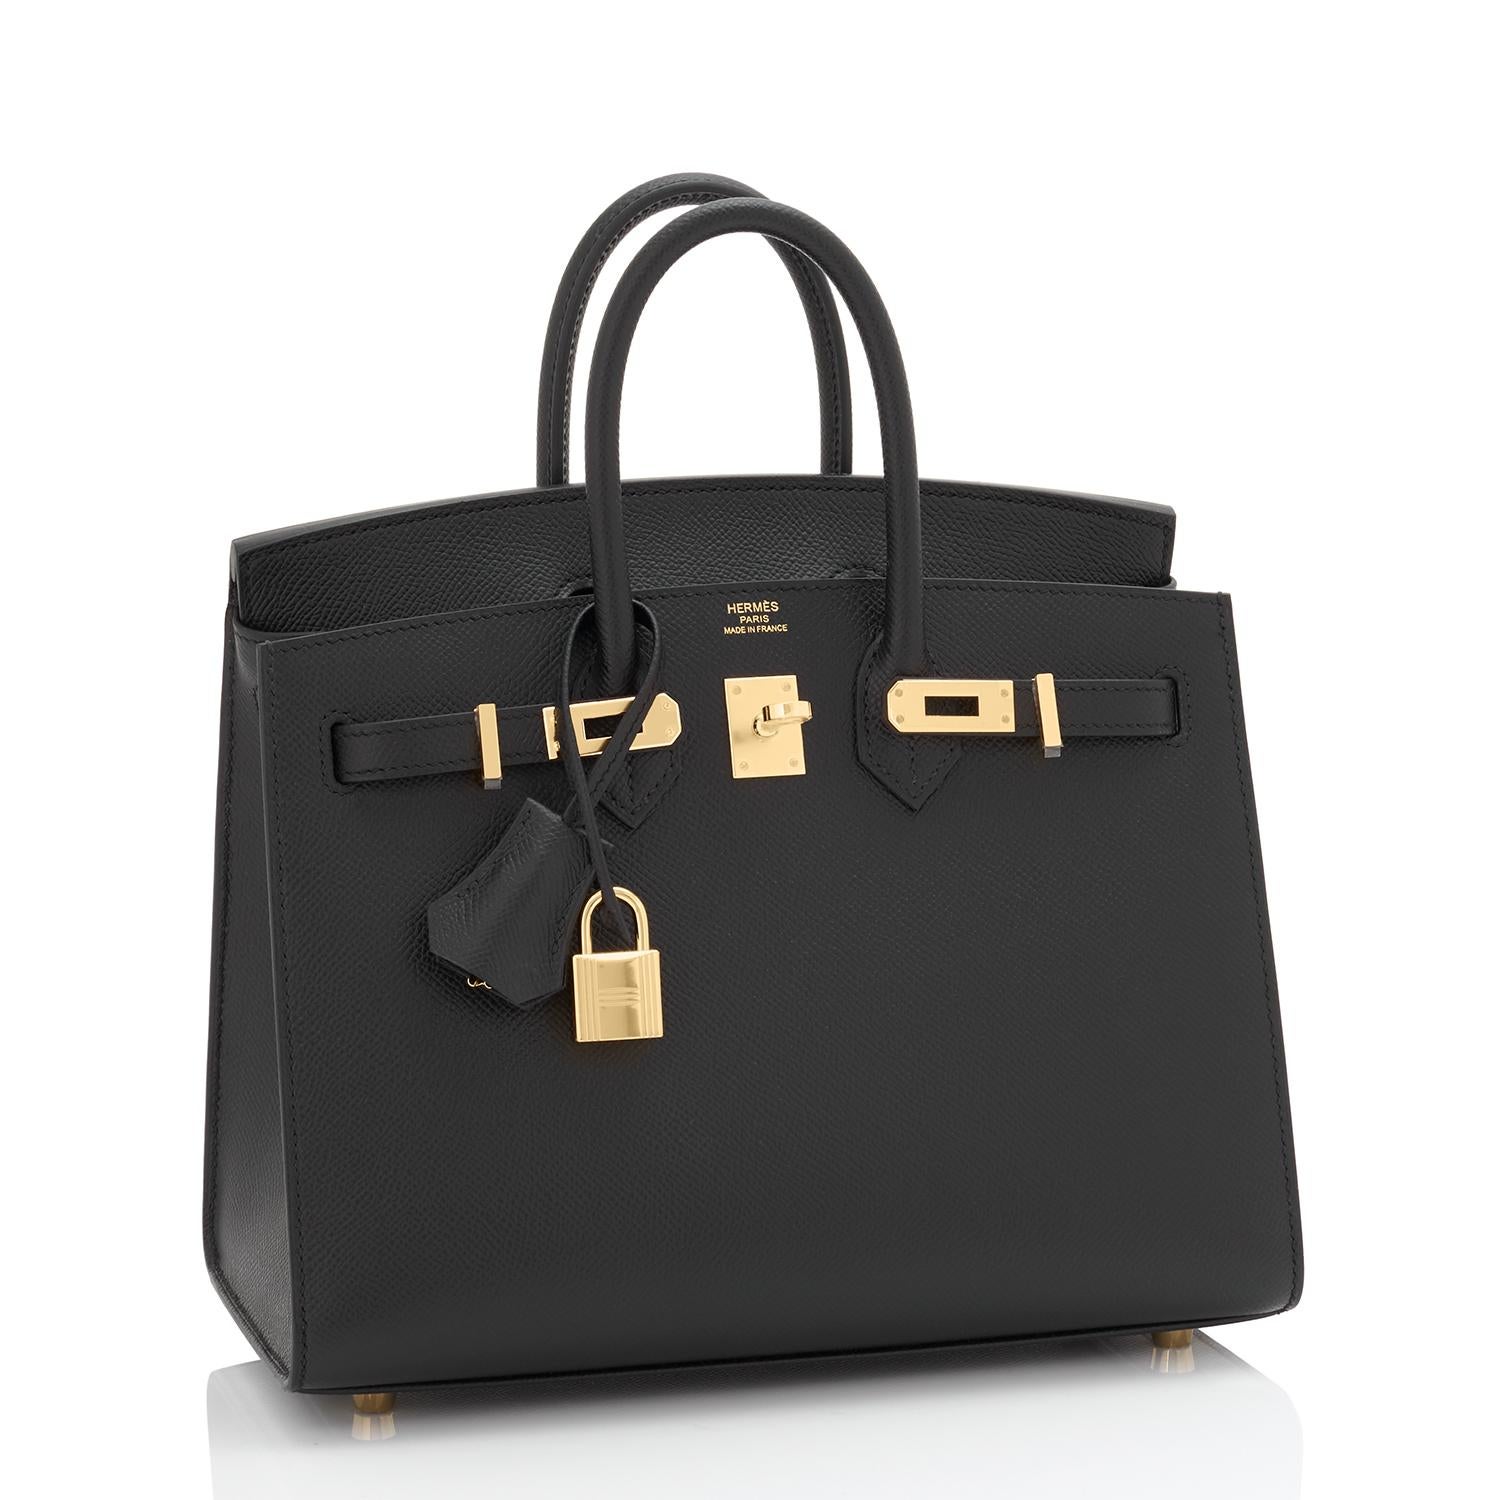 Hermes Birkin 25cm Sellier Black Epsom Gold Hardware U Stamp, 2022 RARE
Brand New in Box. Store Fresh. Pristine Condition (with plastic on hardware) 
Perfect gift! Comes in full set with clochette, lock, keys, raincoat, dust bag, and Hermes